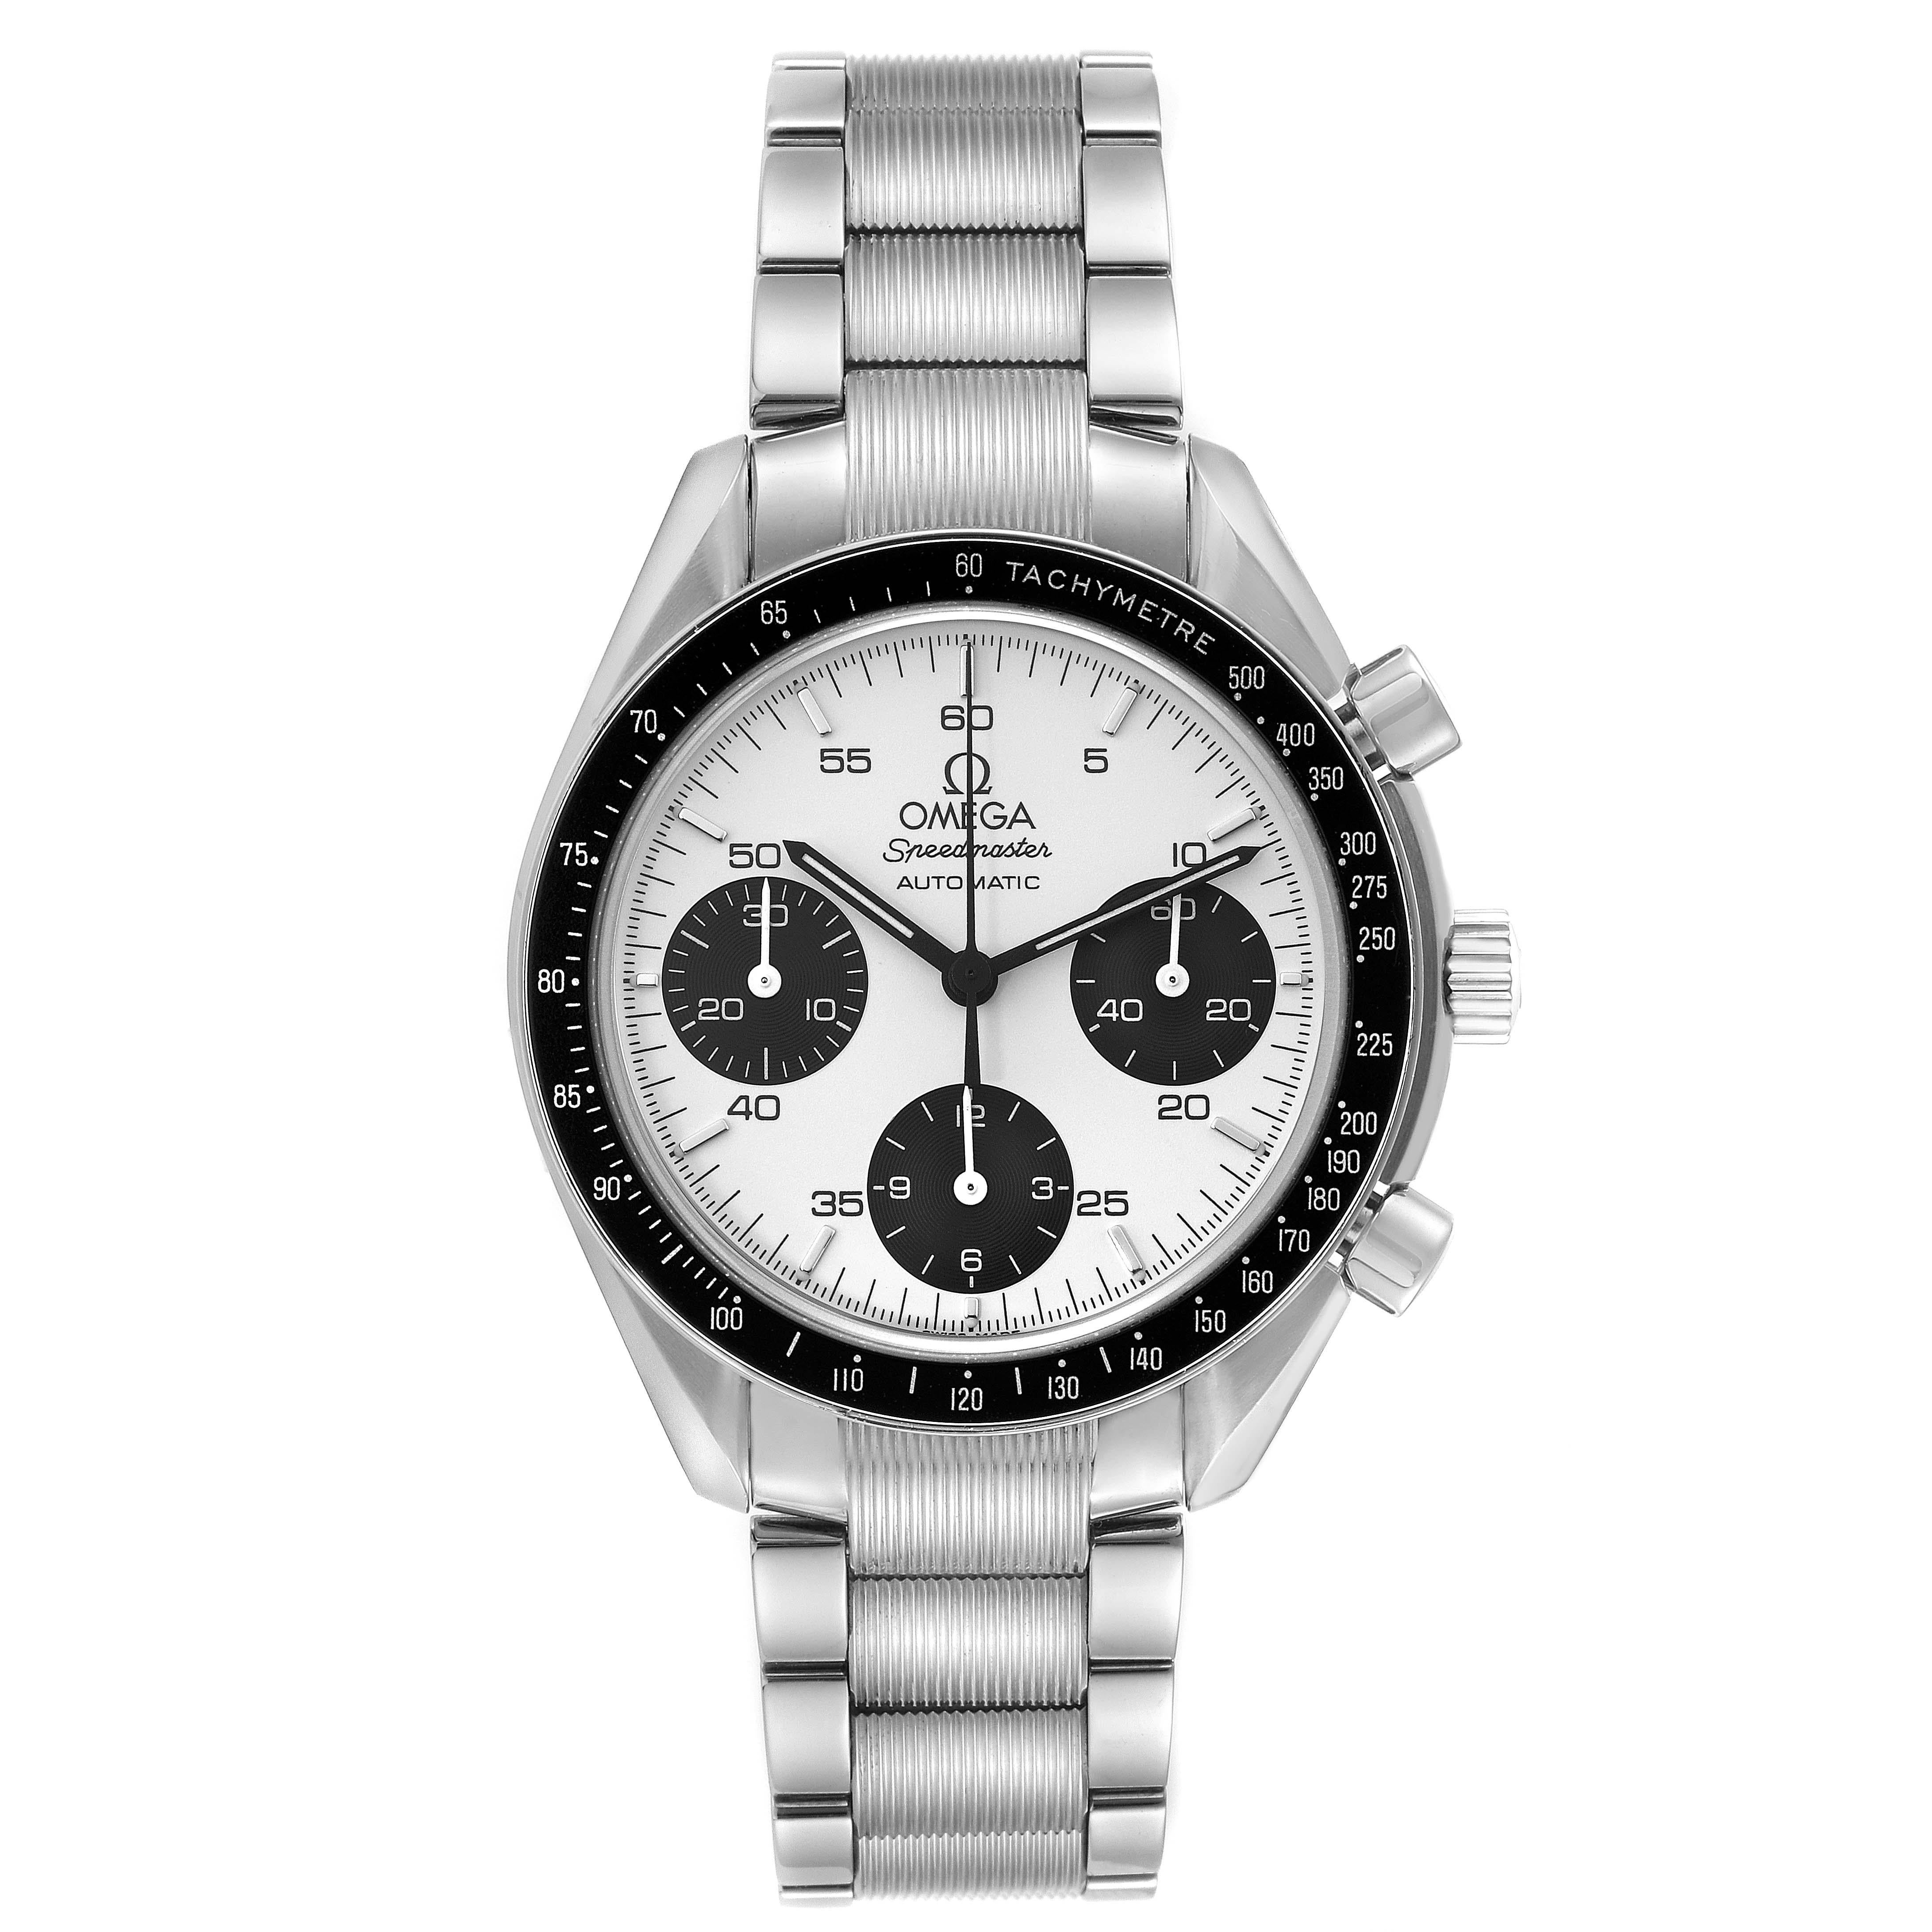 Omega Speedmaster Reduced Marui LE Panda Dial Mens Watch 3539.31.00 Box Card. Automatic self-winding chronograph movement. Stainless steel round case 39 mm in diameter. Black bezel with tachymetre function. Scratch resistant sapphire crystal. Silver